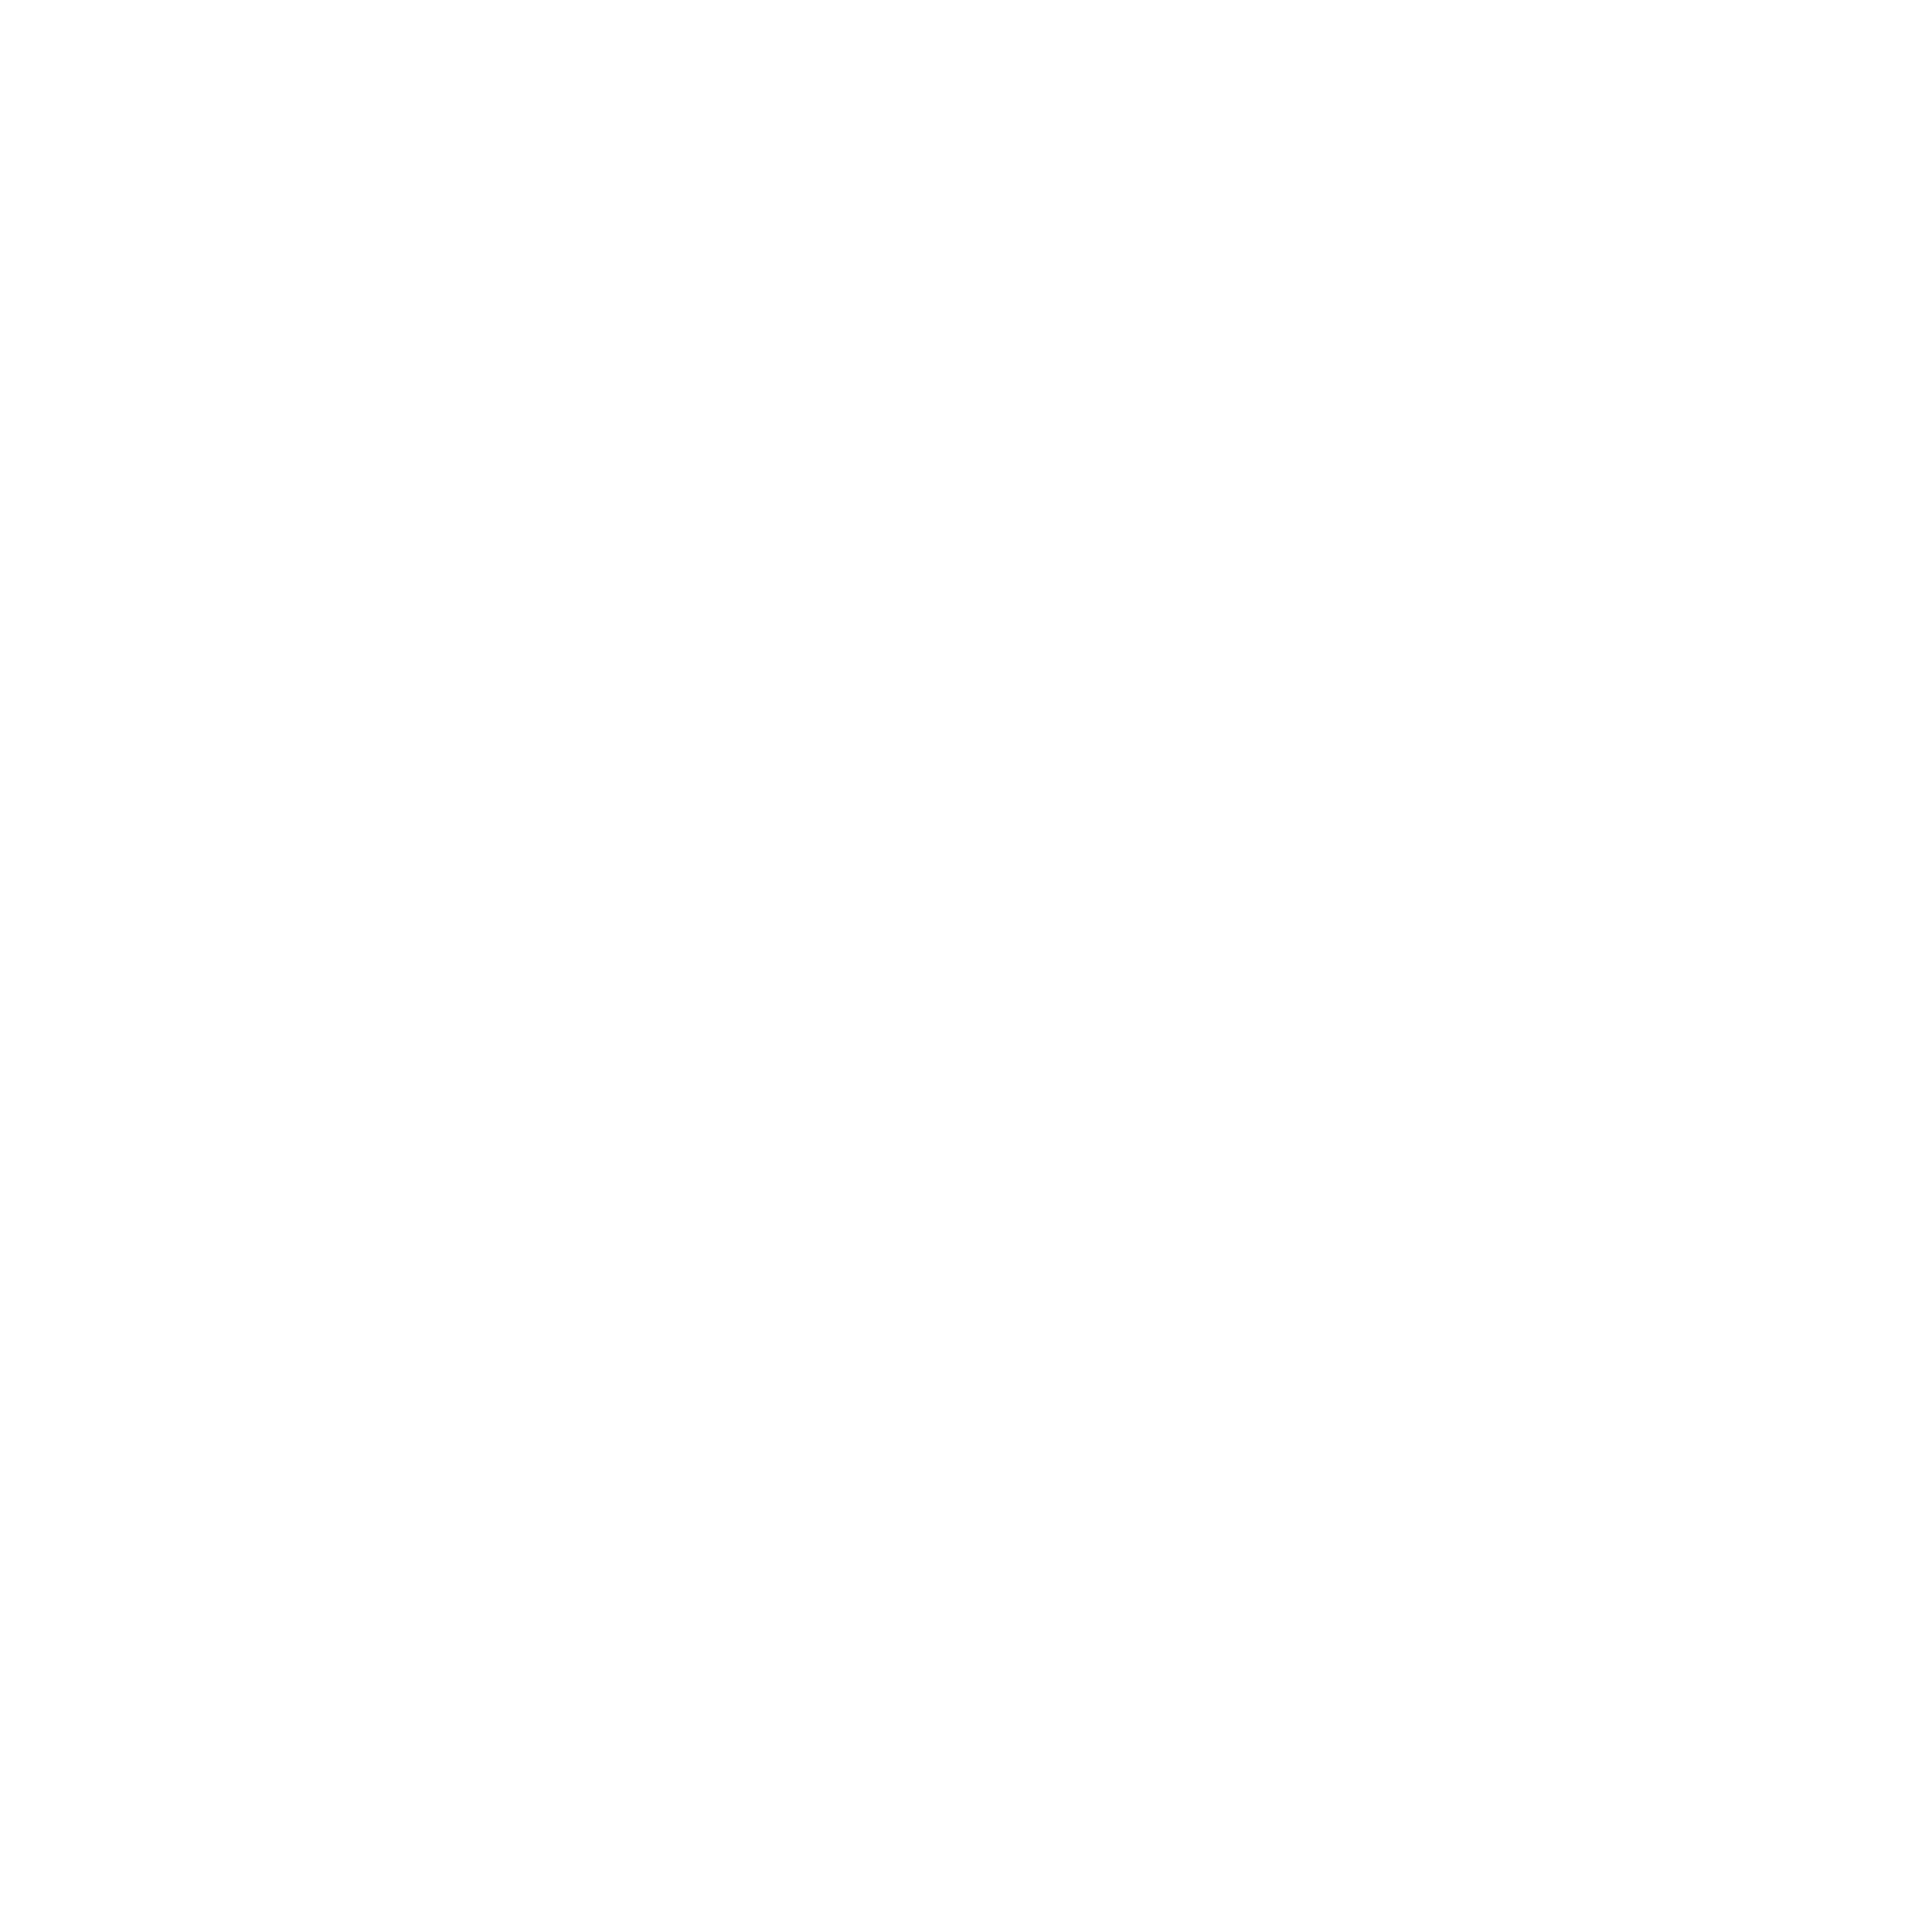 The letter "A" in a circle above the text, "ACFEA Tour Consultants"